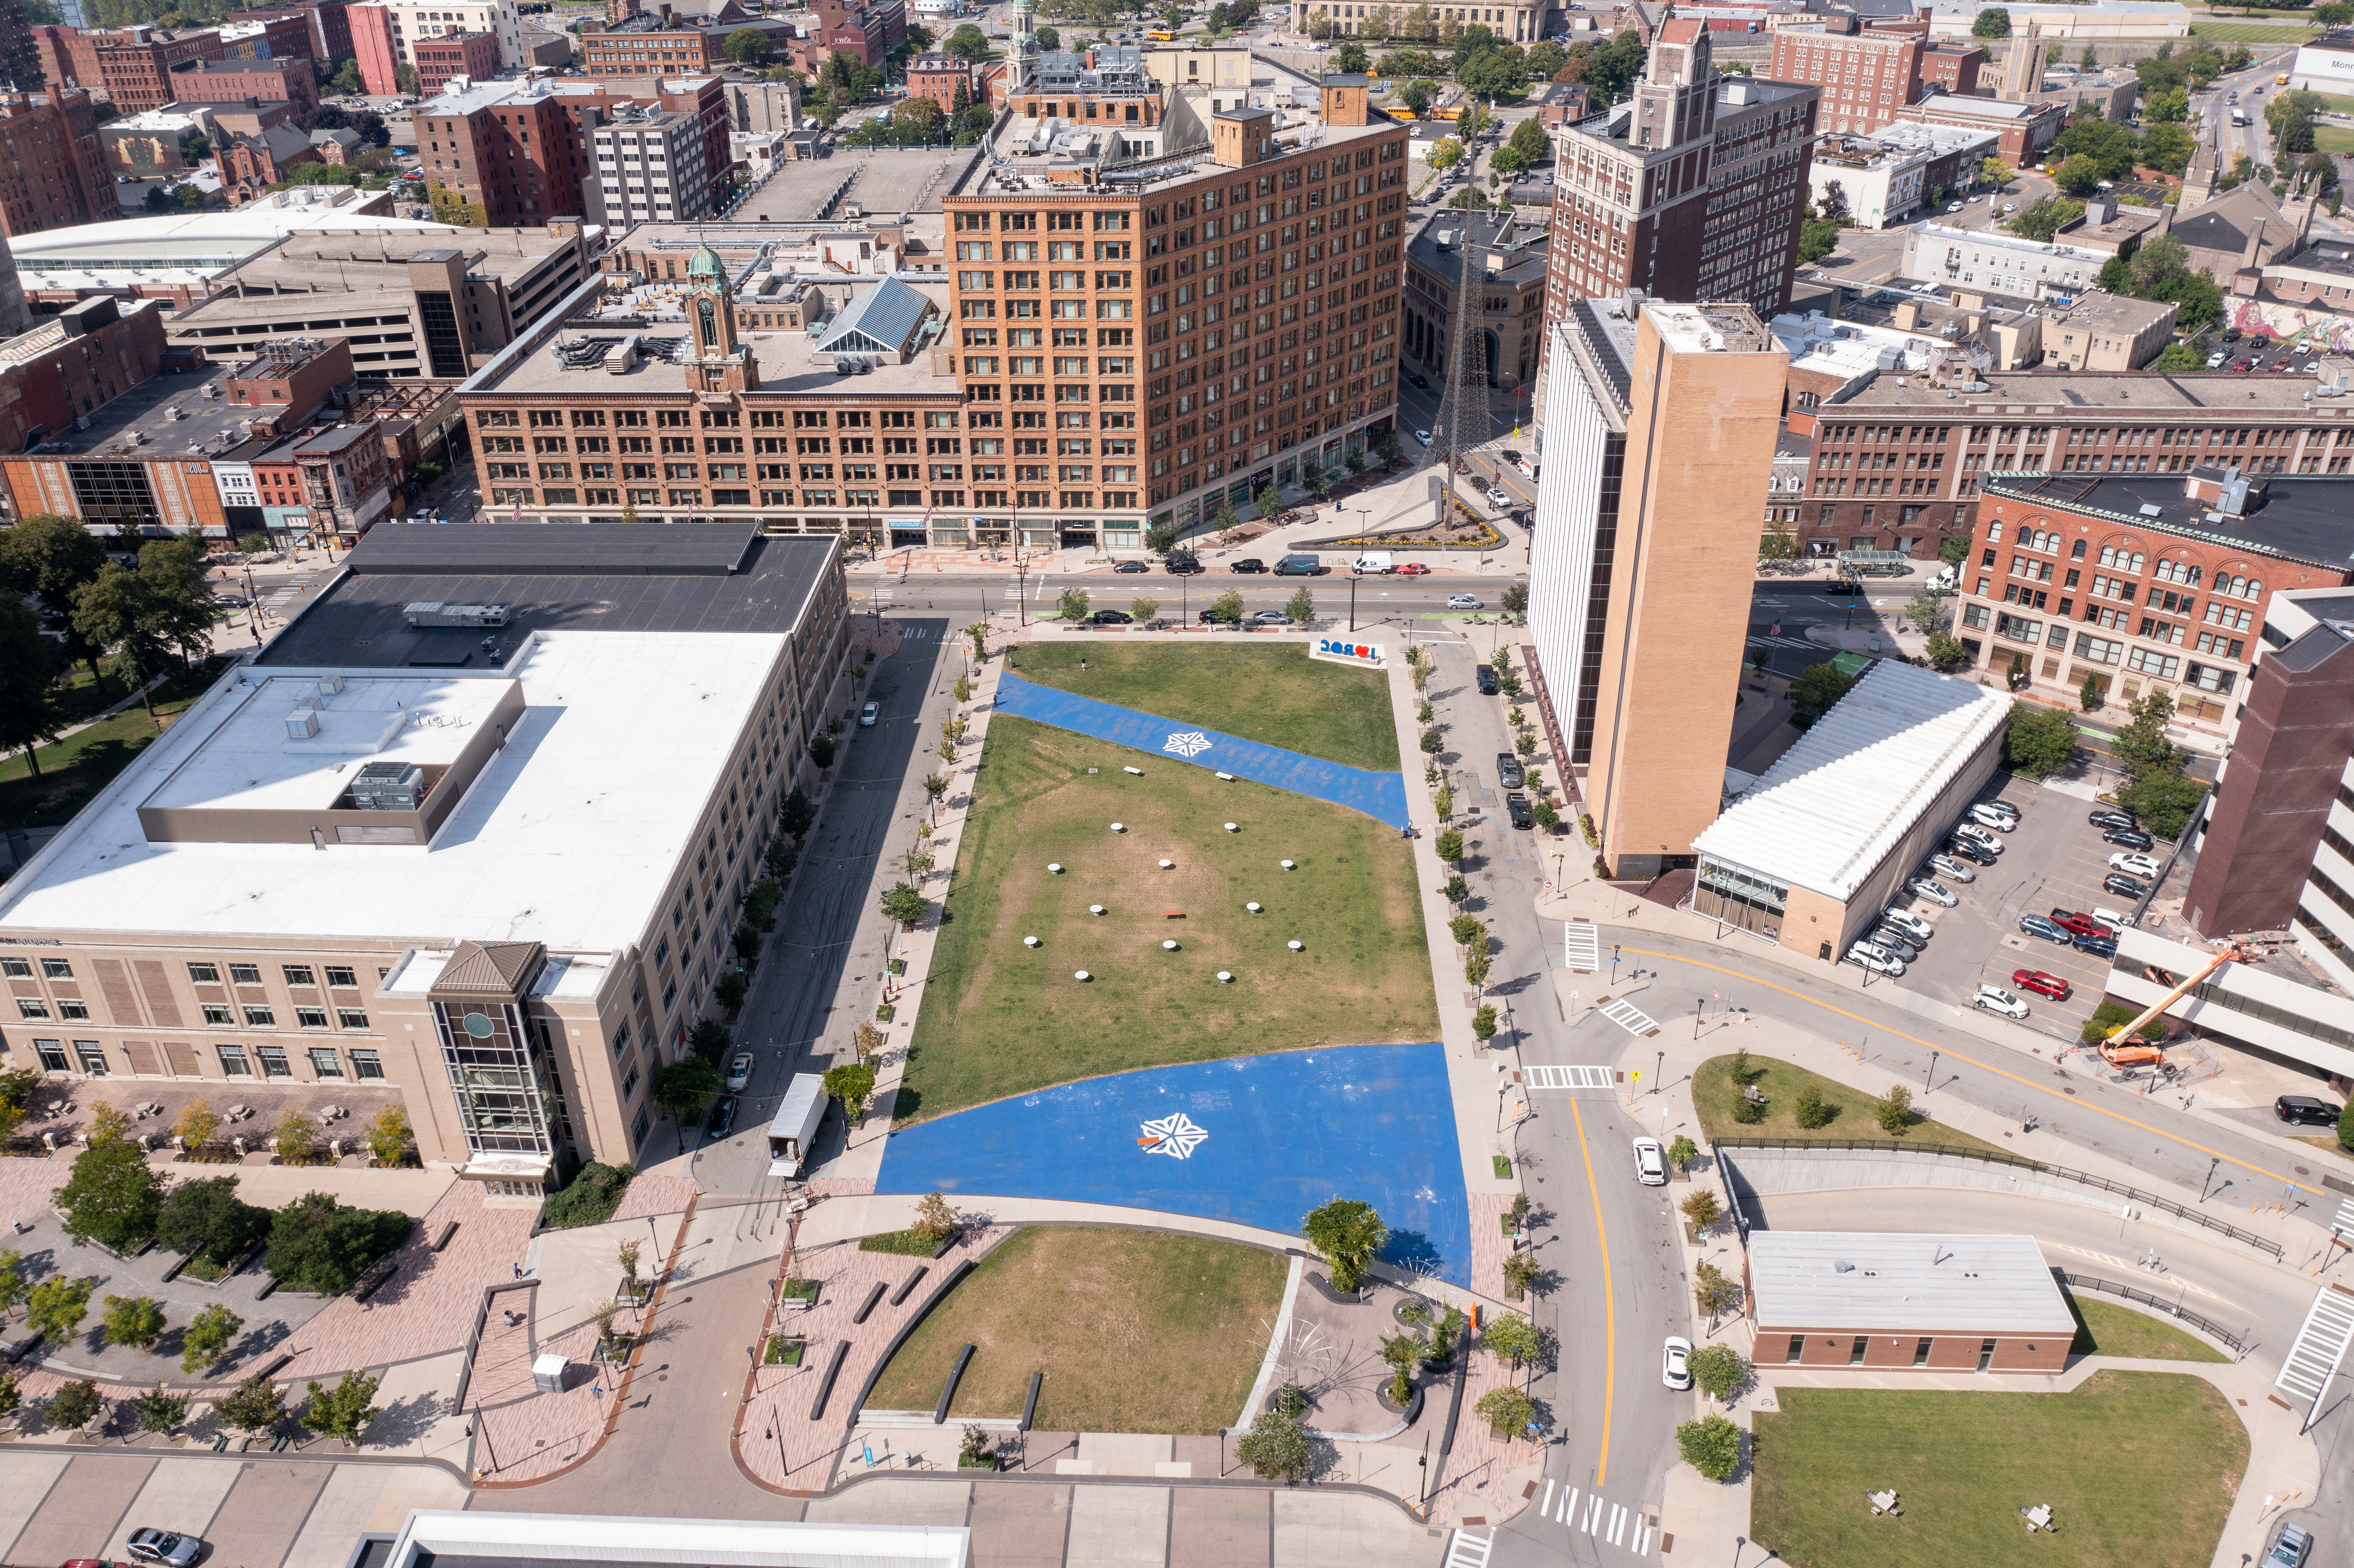 Drone view of Parcel 5 in Rochester.